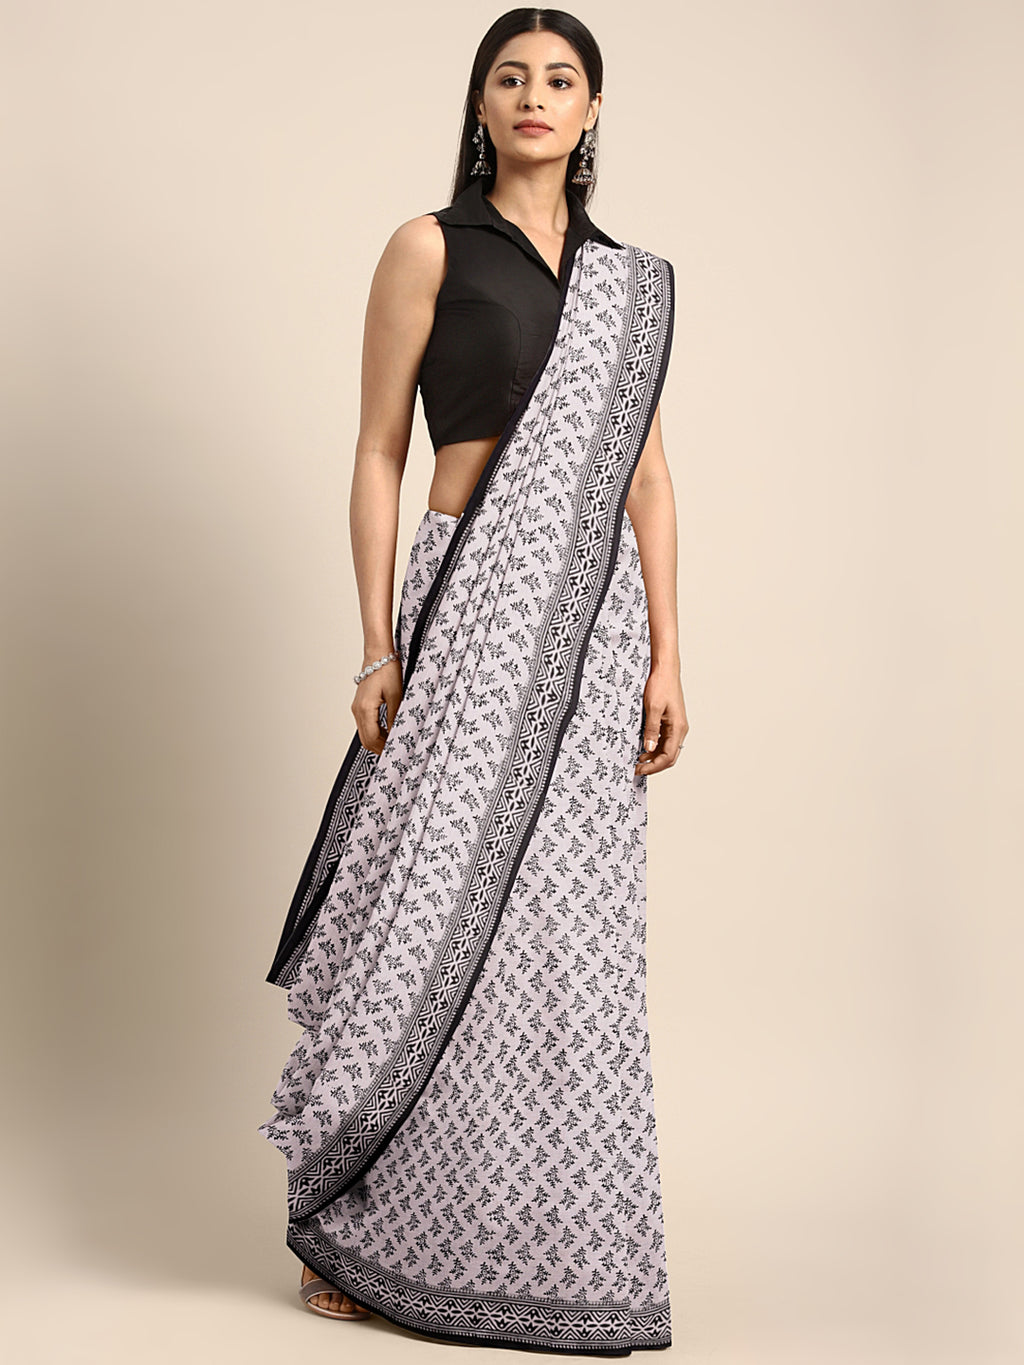 White and Black, Kalakari India Off-White & Black Handblock Print Bagh Saree ZIBASA0107-Saree-Kalakari India-ZIBASA0107-Bagh, Cotton, Geographical Indication, Hand Crafted, Heritage Prints, Natural Dyes, Red, Sarees, Sustainable Fabrics, Woven, Yellow-[Linen,Ethnic,wear,Fashionista,Handloom,Handicraft,Indigo,blockprint,block,print,Cotton,Chanderi,Blue, latest,classy,party,bollywood,trendy,summer,style,traditional,formal,elegant,unique,style,hand,block,print, dabu,booti,gift,present,glamorous,aff